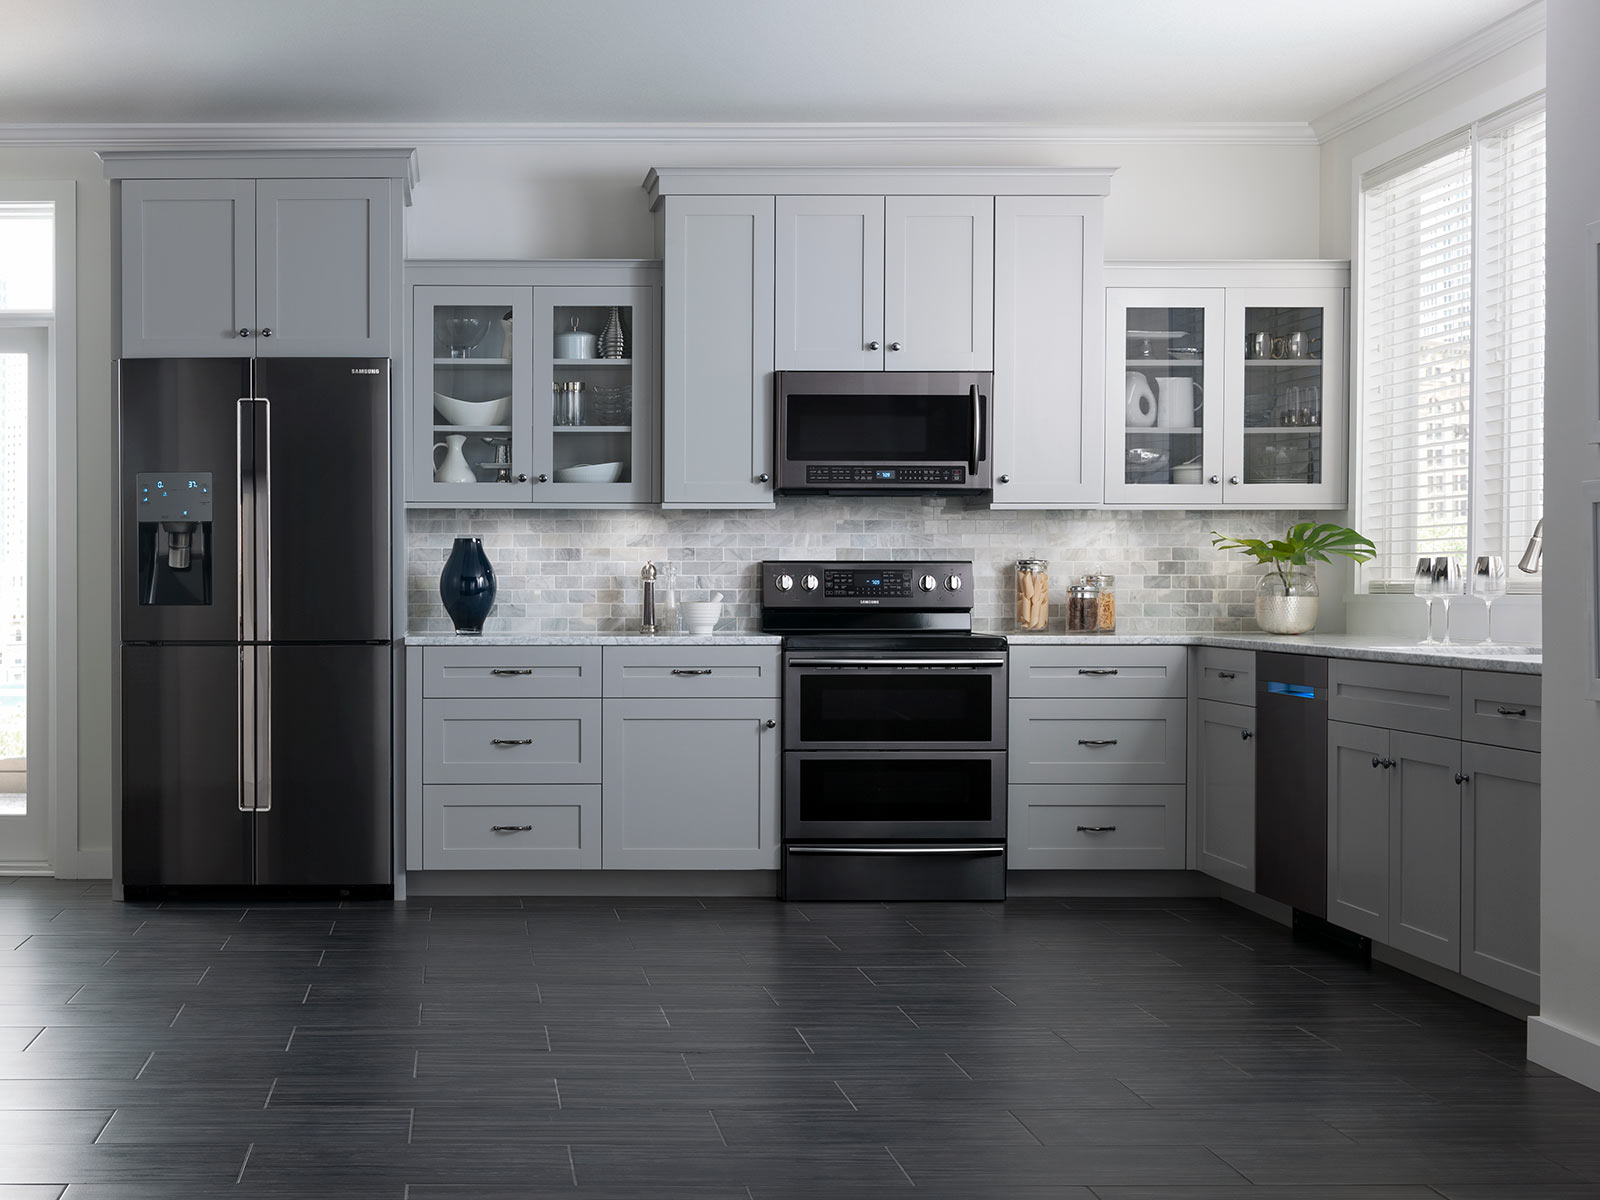 Thumbnail image of 5.9 cu. ft. Freestanding Electric Range with Flex Duo&trade; &amp; Dual Door in Black Stainless Steel